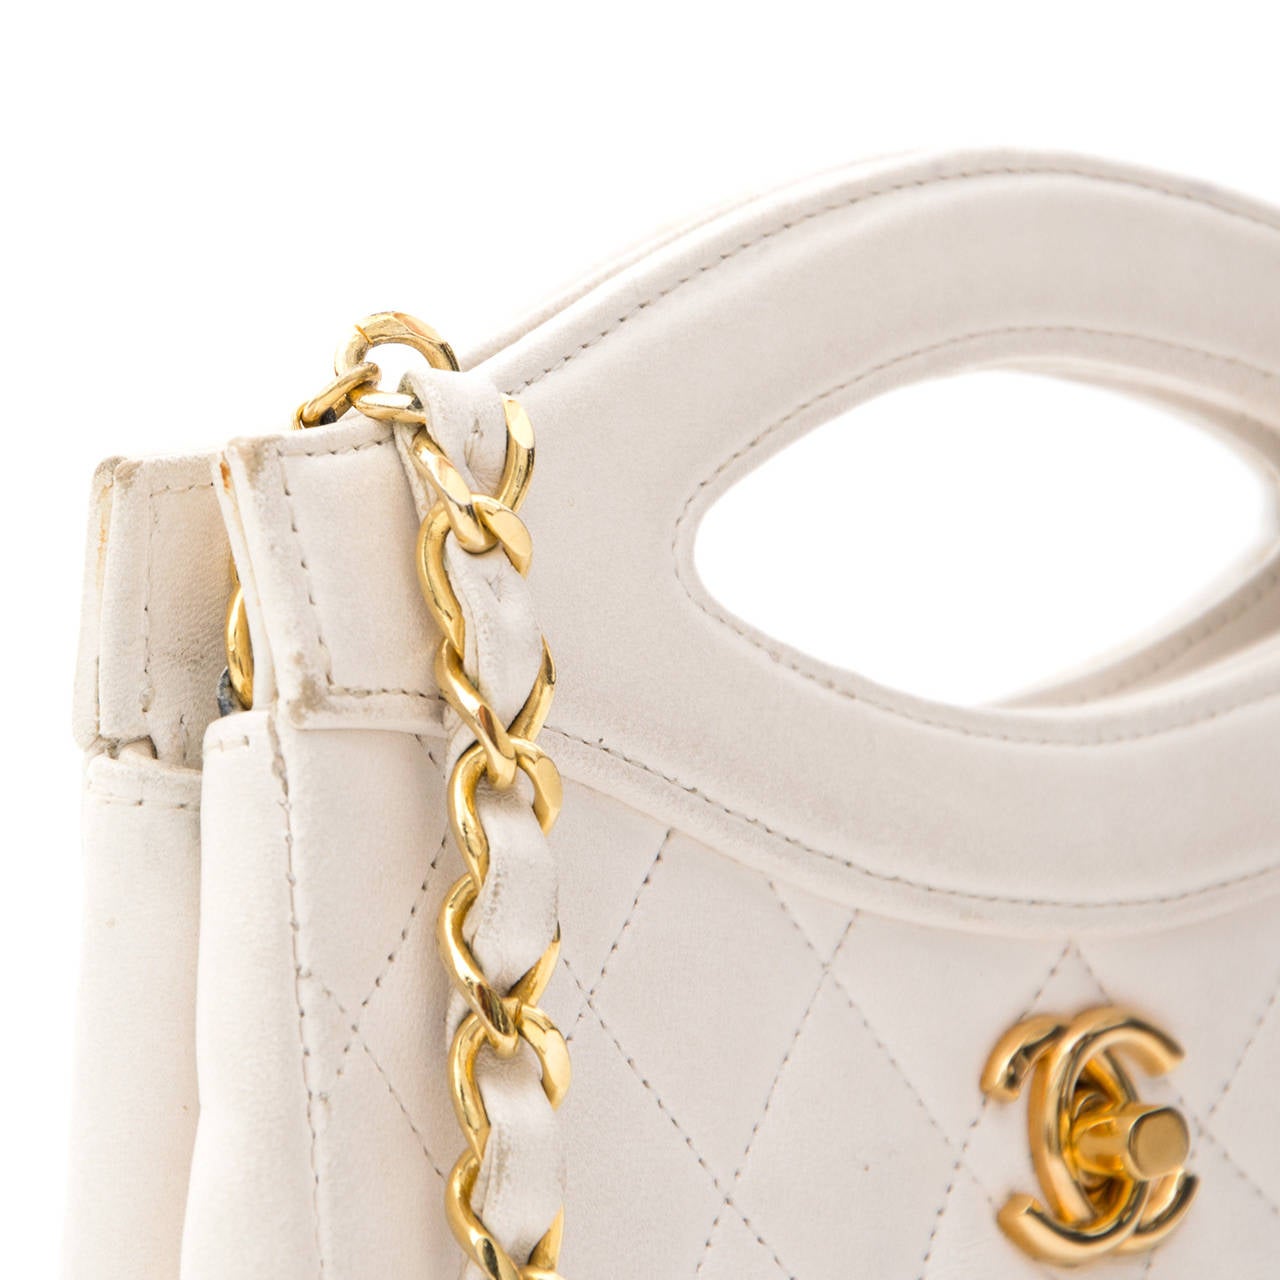 Chanel cream colored lambskin evening top handle clutch on a gold-tone chain. Classic Chanel turnlock and entwined leather and chain shoulder strap.